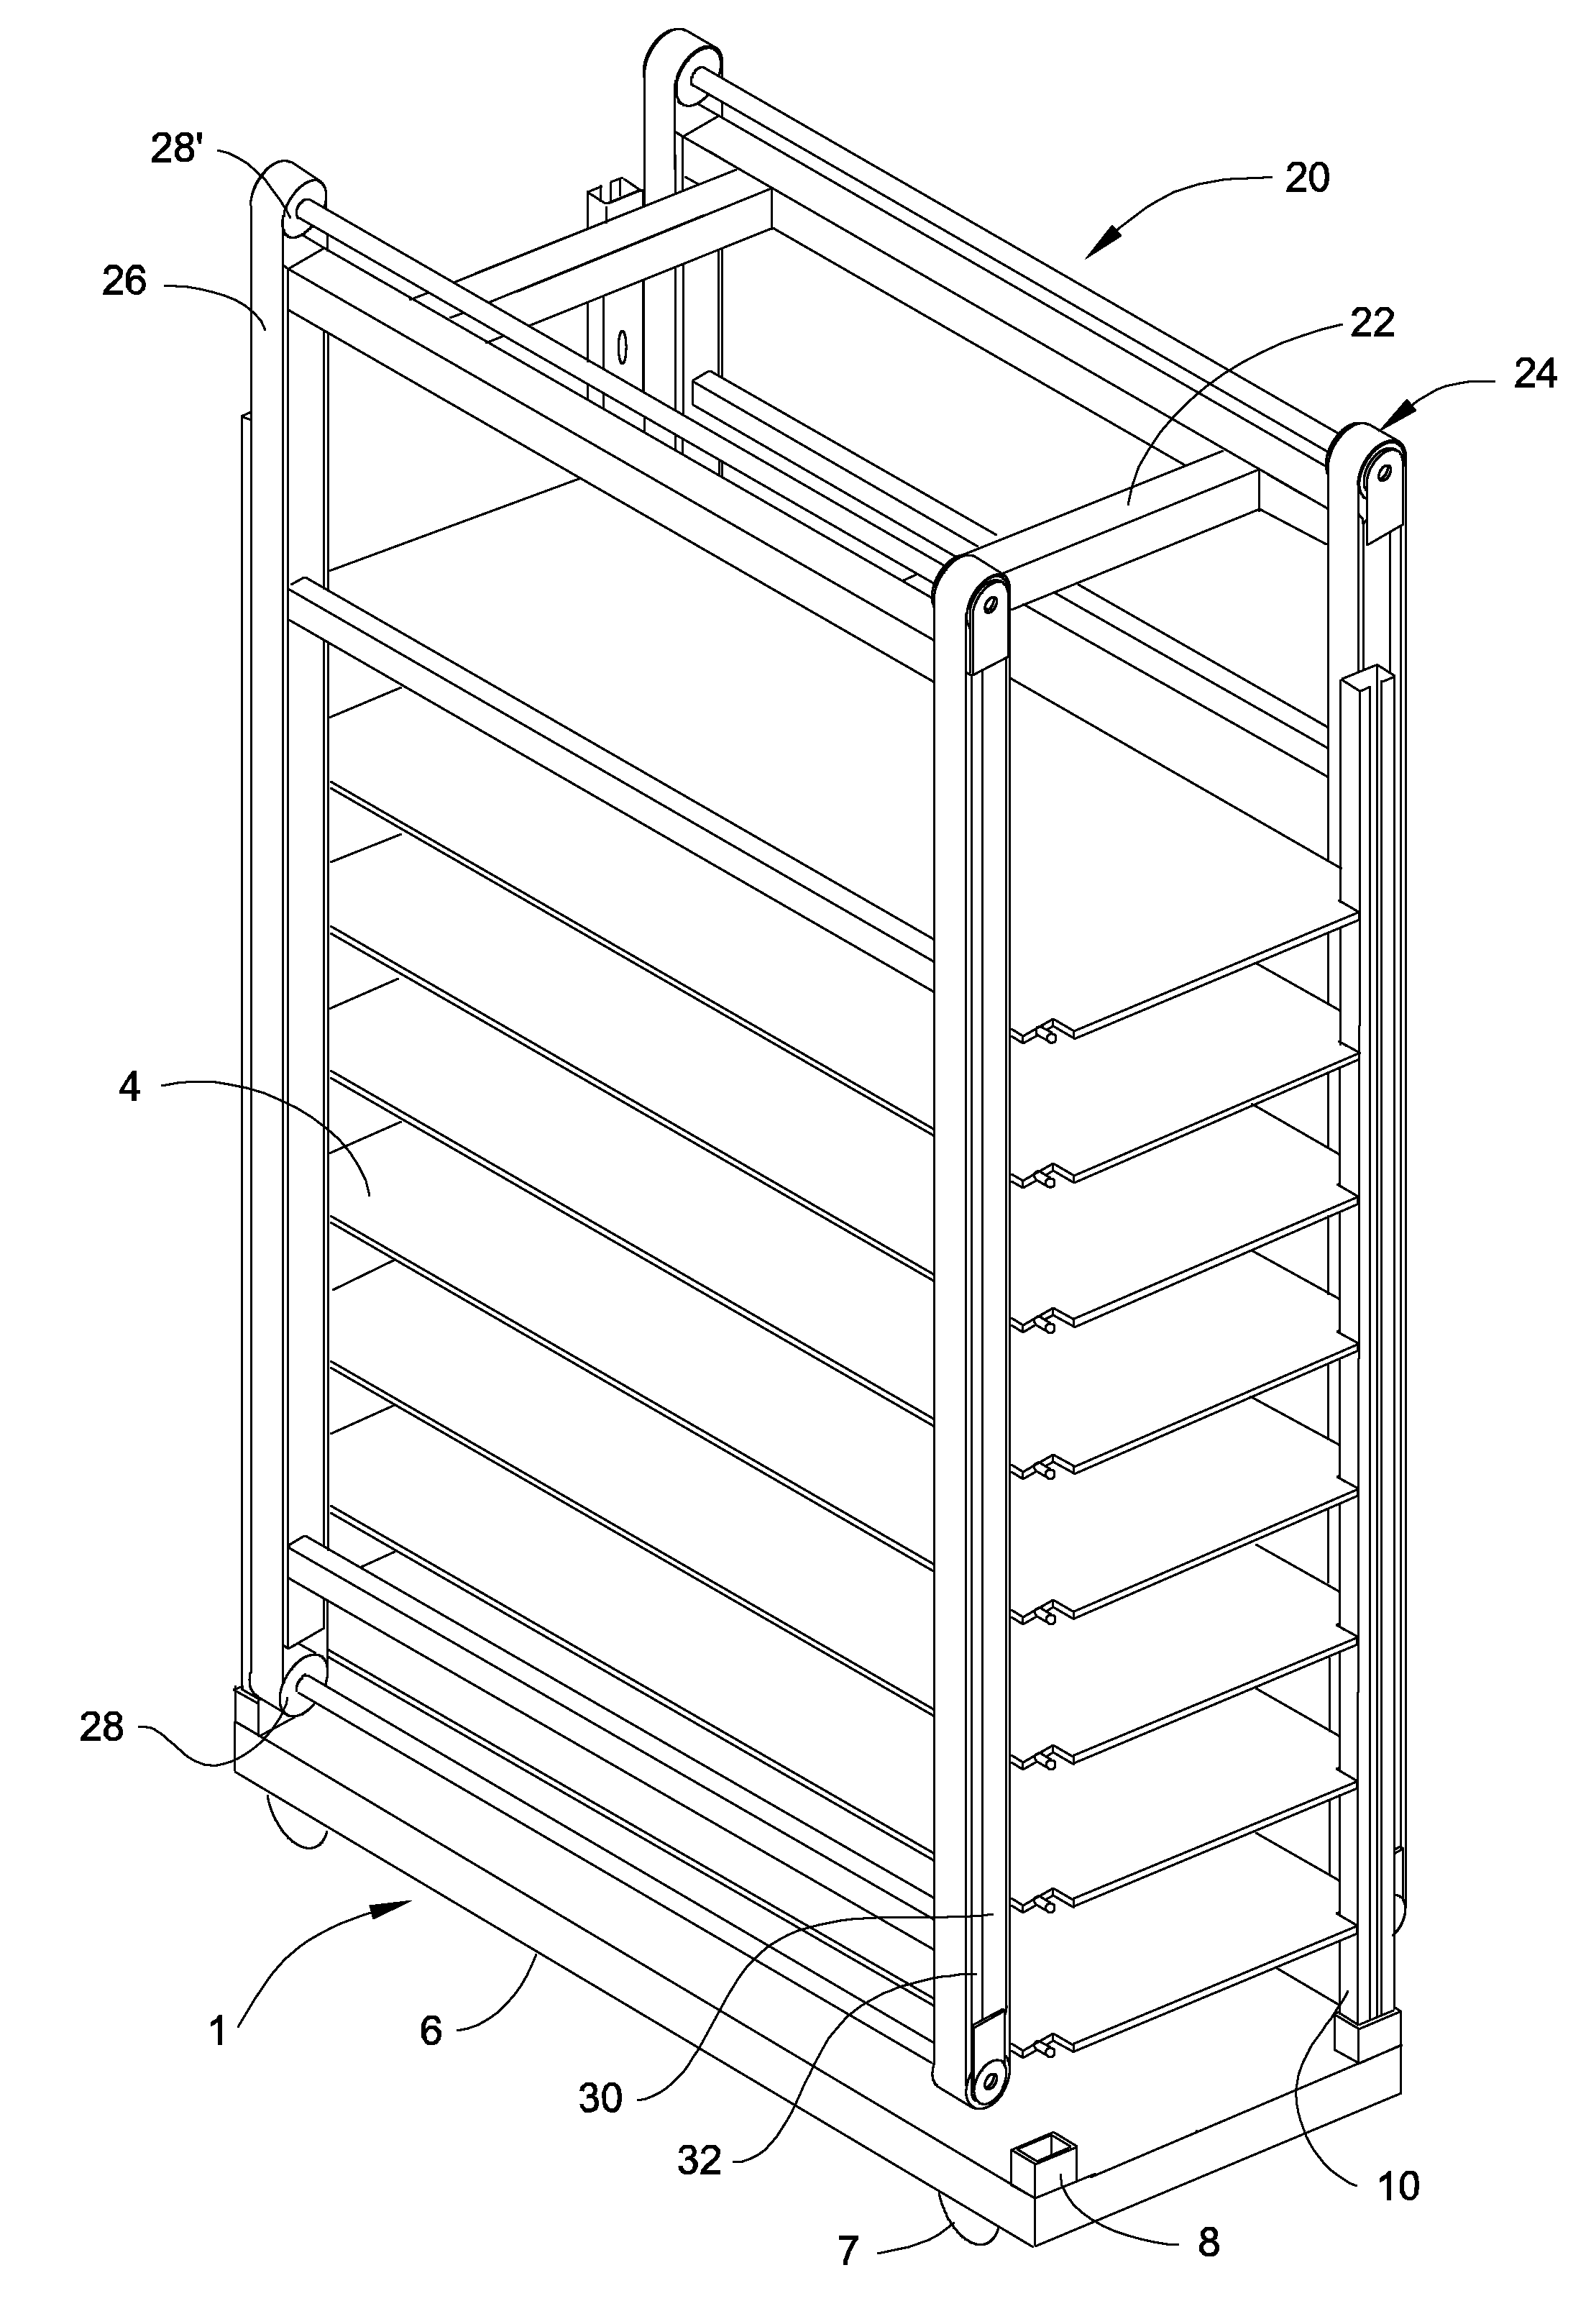 Apparatus and Method for Dismantling Shelving Units